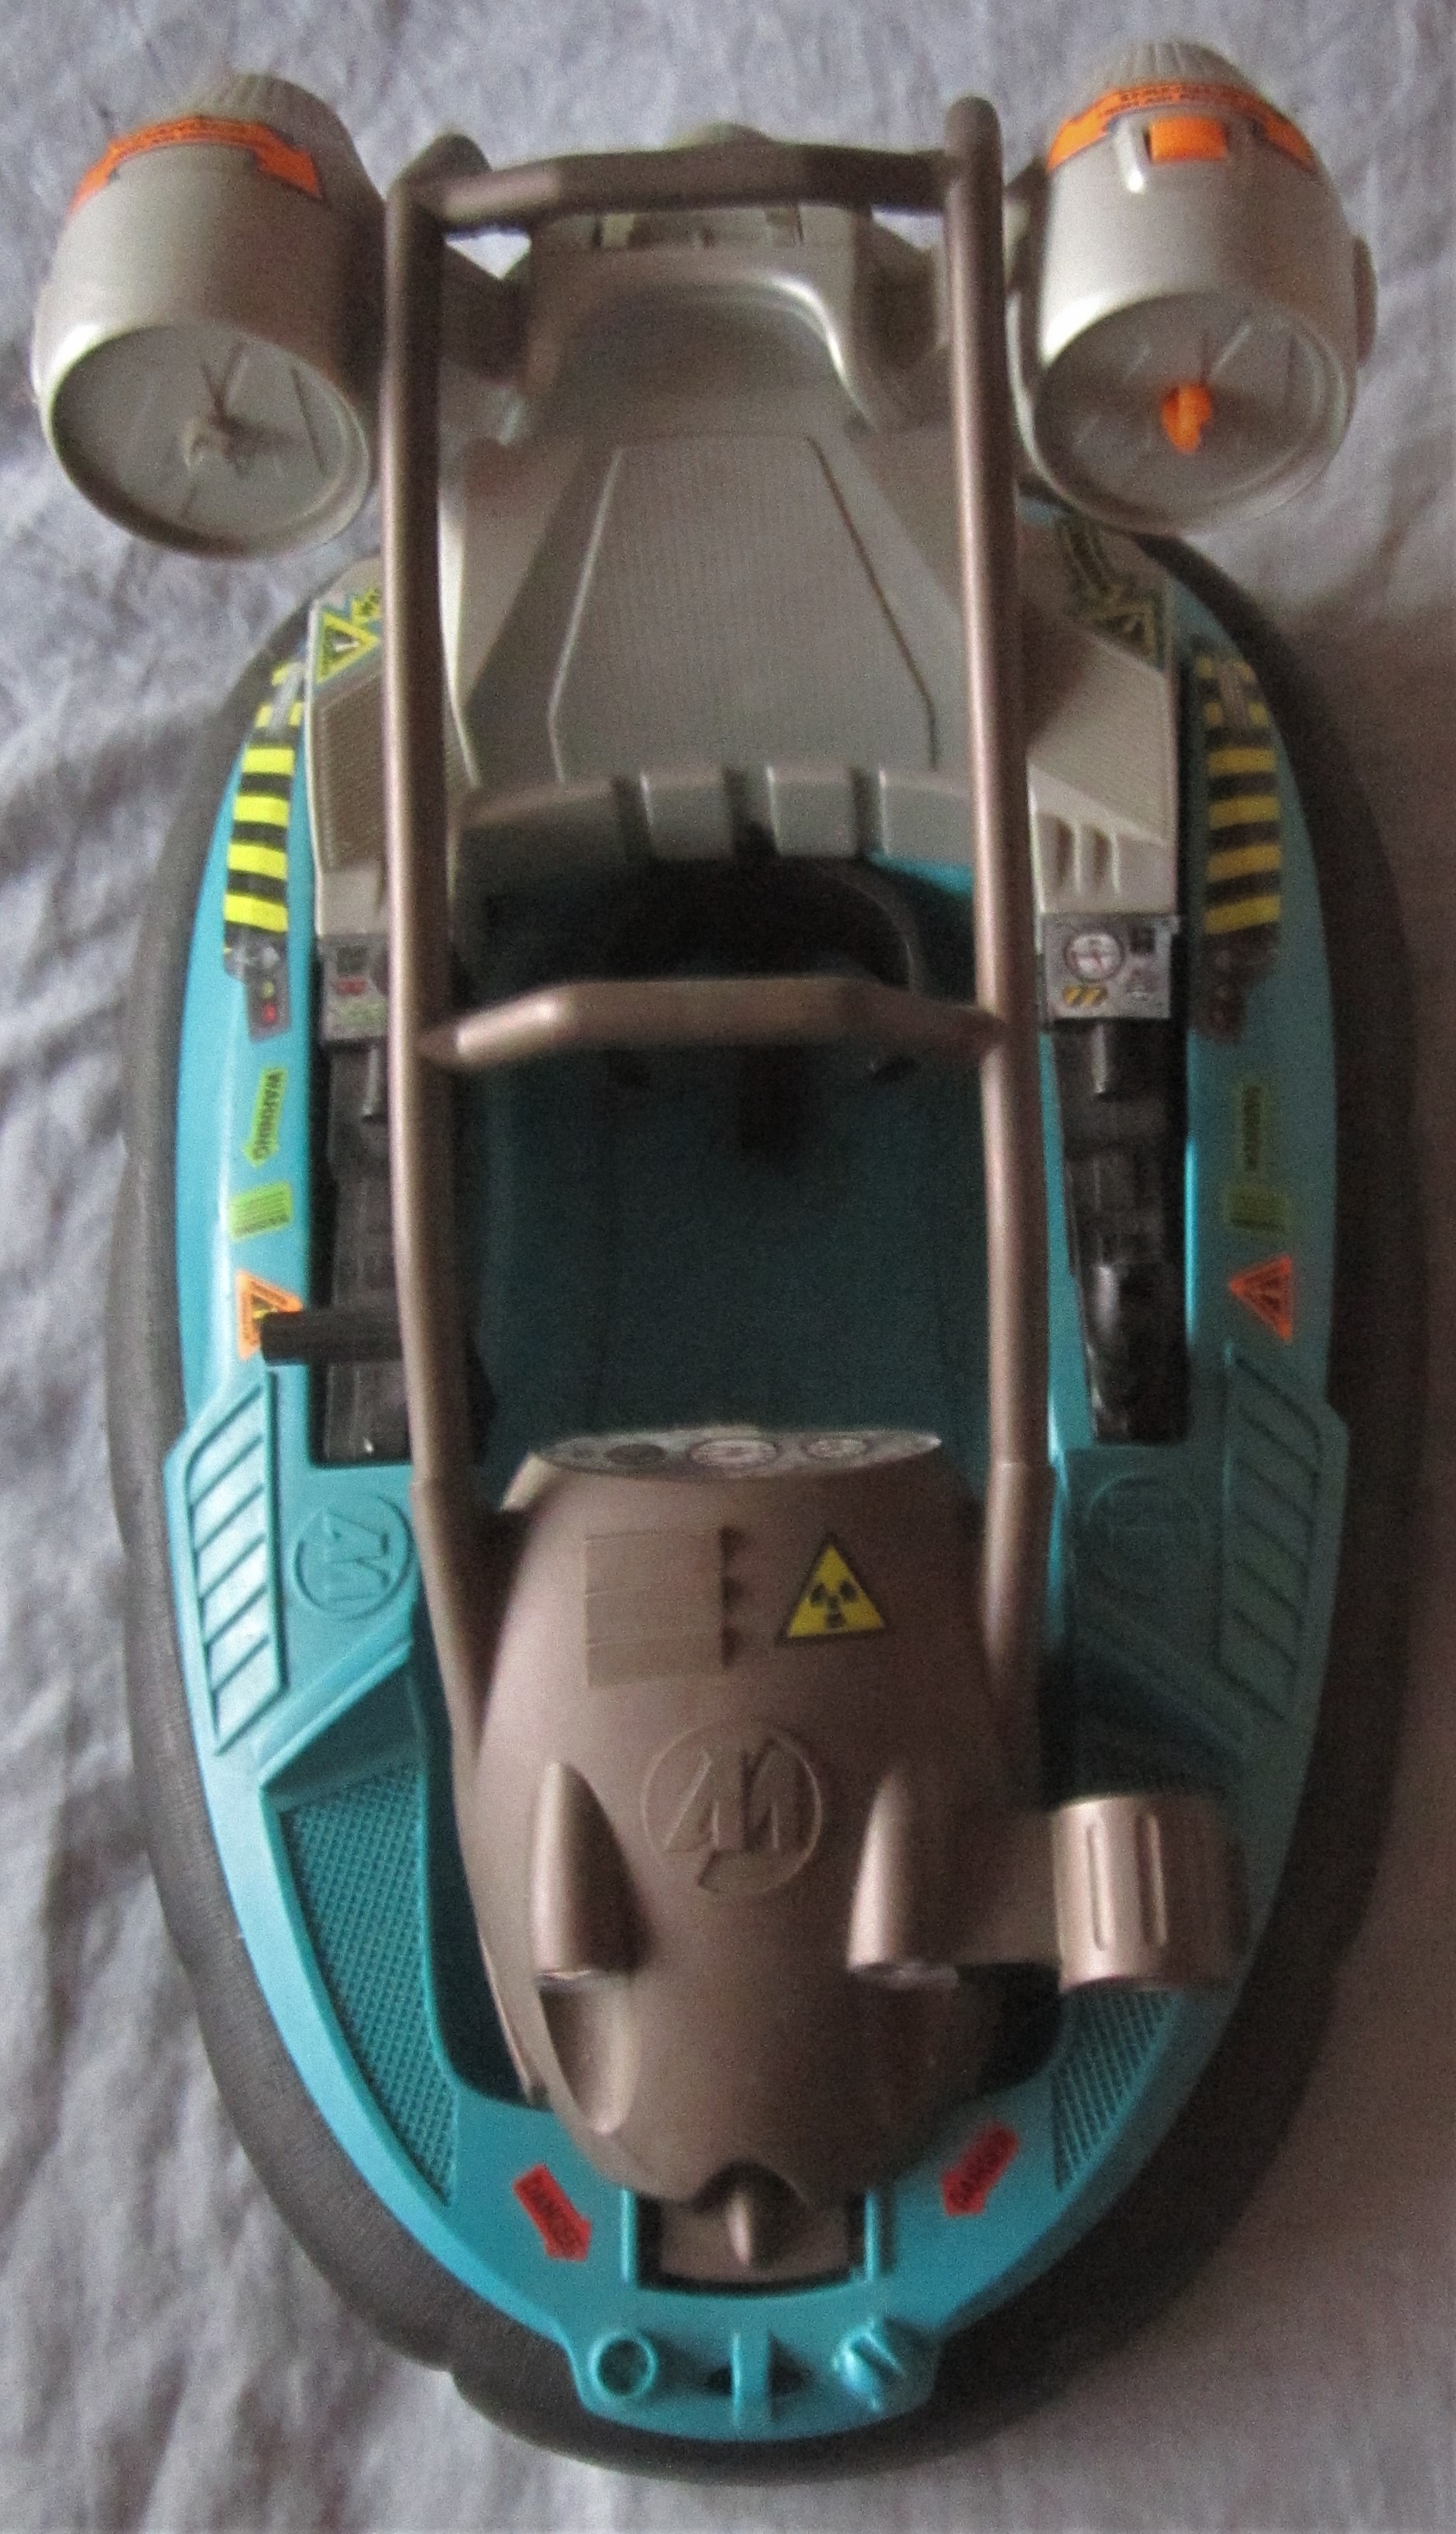 TOYS - ACTION MAN 2 IN 1 HOVERCRAFT HYDRO JET